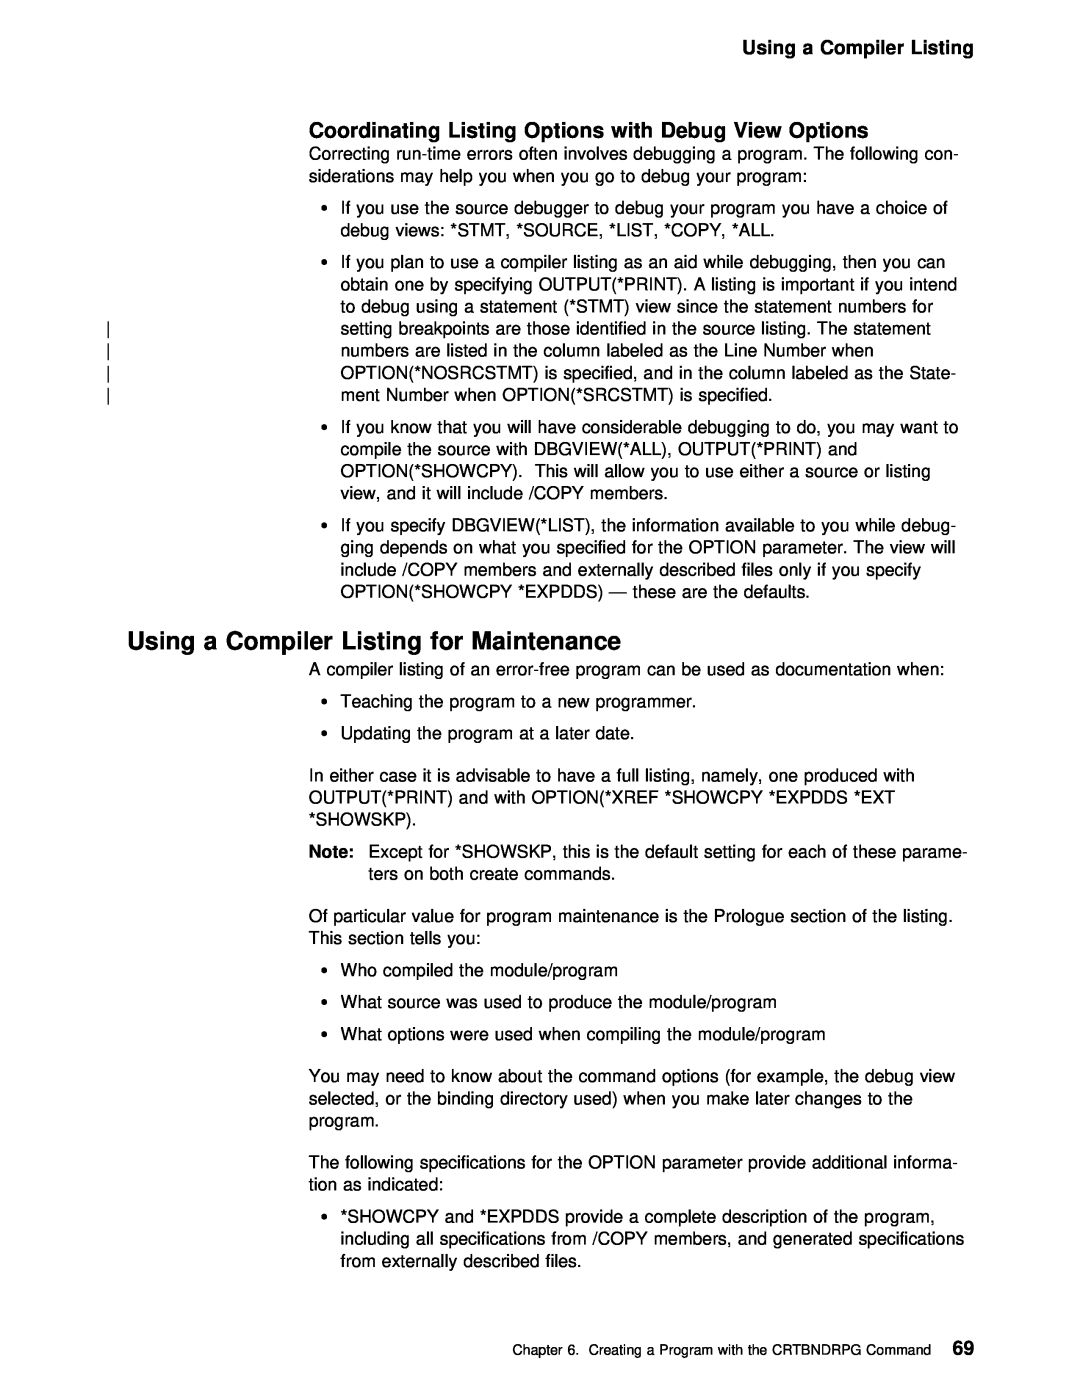 IBM AS/400 manual Using a Compiler Listing for, Maintenance, Coordinating Listing Options with Debug View Options 